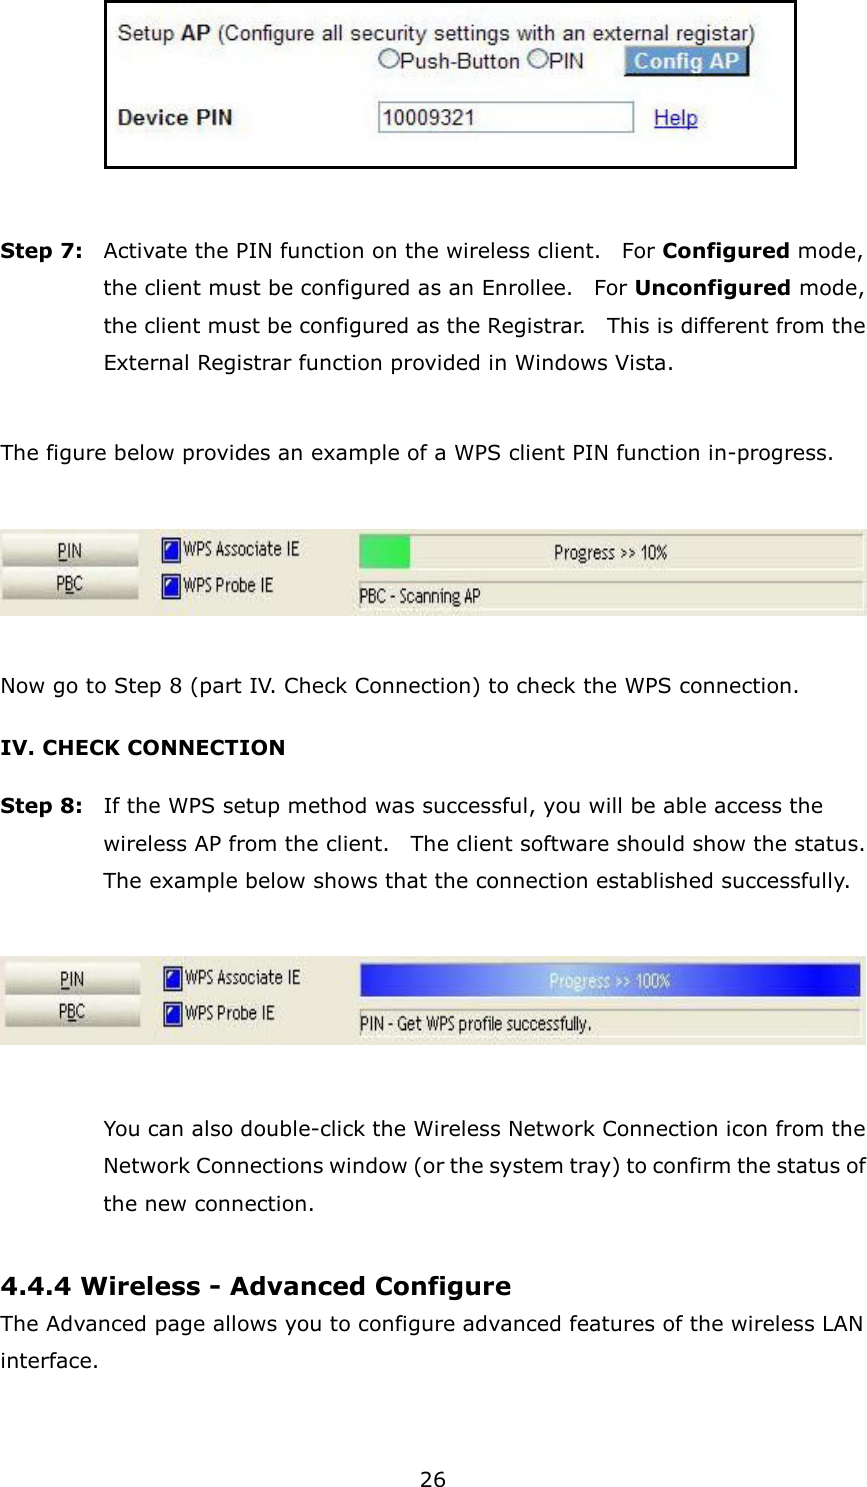 26      Step 7:  Activate the PIN function on the wireless client.    For Configured mode, the client must be configured as an Enrollee.    For Unconfigured mode, the client must be configured as the Registrar.    This is different from the External Registrar function provided in Windows Vista.        The figure below provides an example of a WPS client PIN function in-progress.    Now go to Step 8 (part IV. Check Connection) to check the WPS connection. IV. CHECK CONNECTION Step 8:  If the WPS setup method was successful, you will be able access the wireless AP from the client.    The client software should show the status.   The example below shows that the connection established successfully.      You can also double-click the Wireless Network Connection icon from the Network Connections window (or the system tray) to confirm the status of the new connection.  4.4.4 Wireless - Advanced Configure The Advanced page allows you to configure advanced features of the wireless LAN interface.    